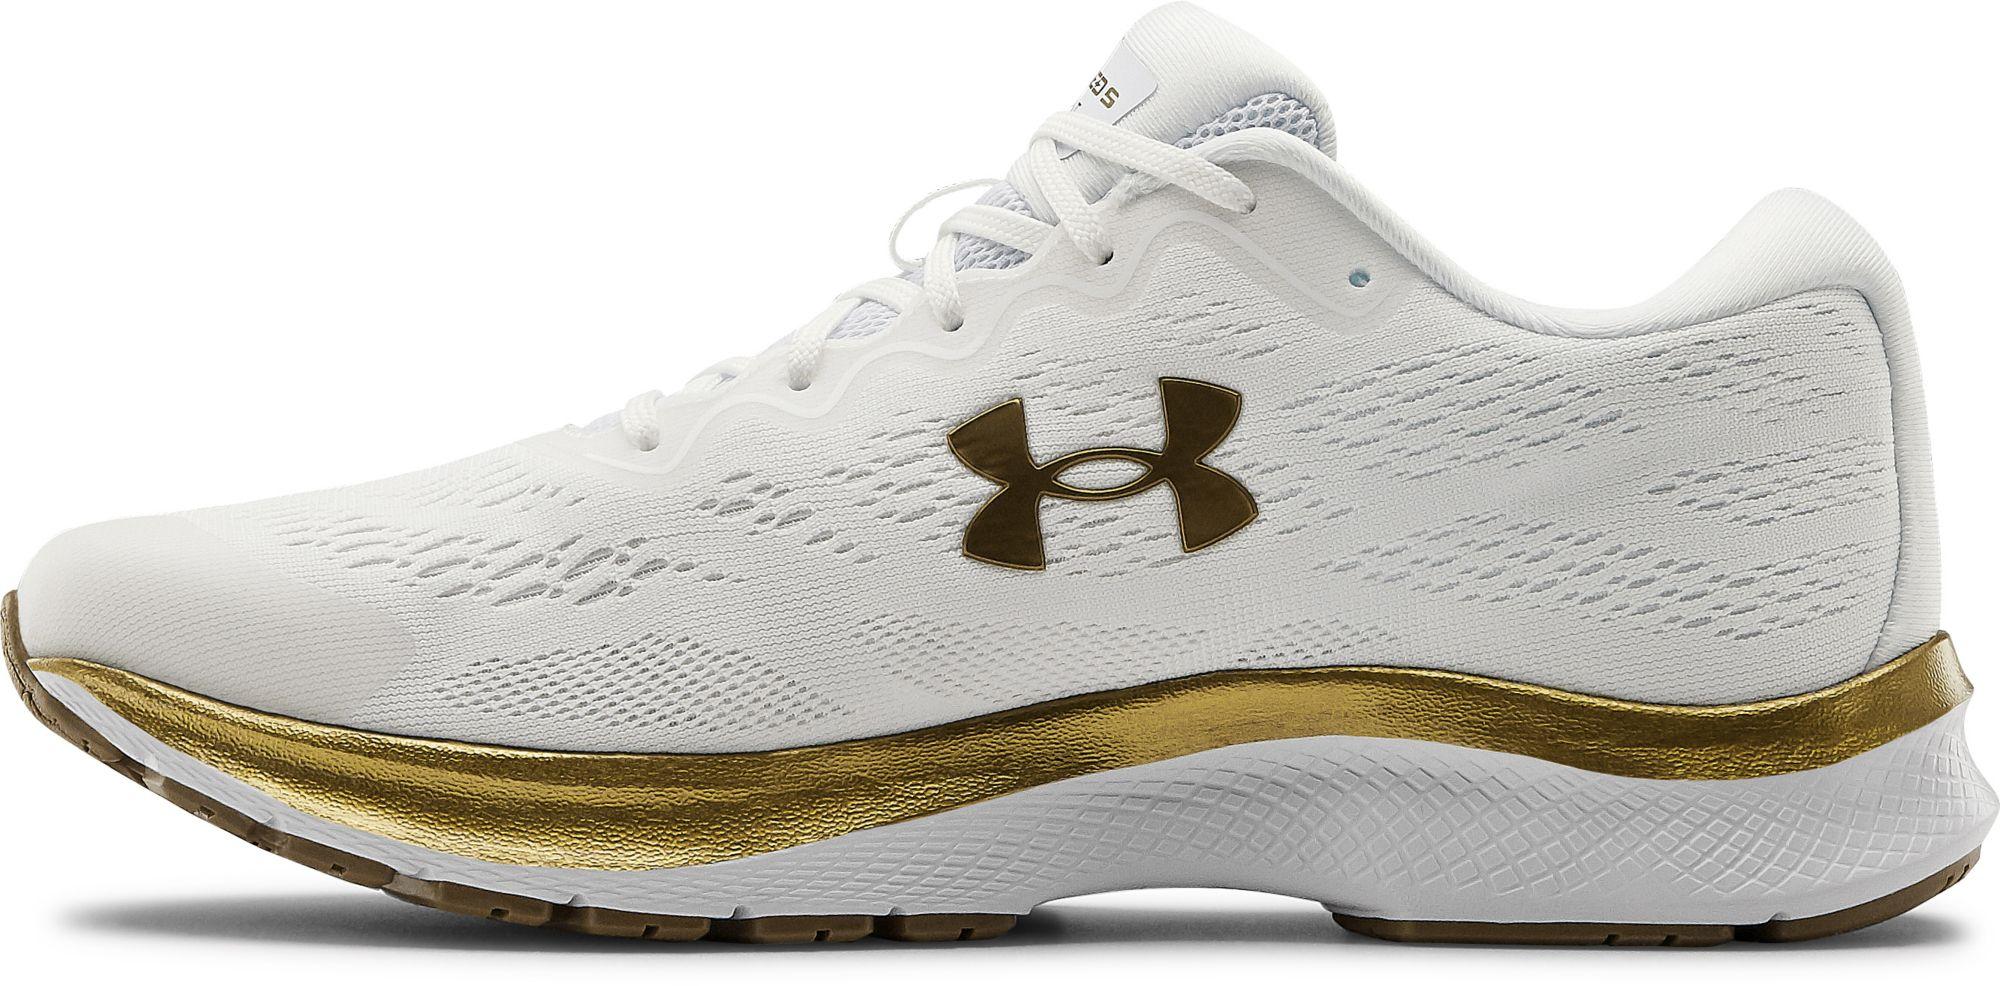 Under Armour Rubber Charged Bandit 6 Running Shoes in White - Lyst